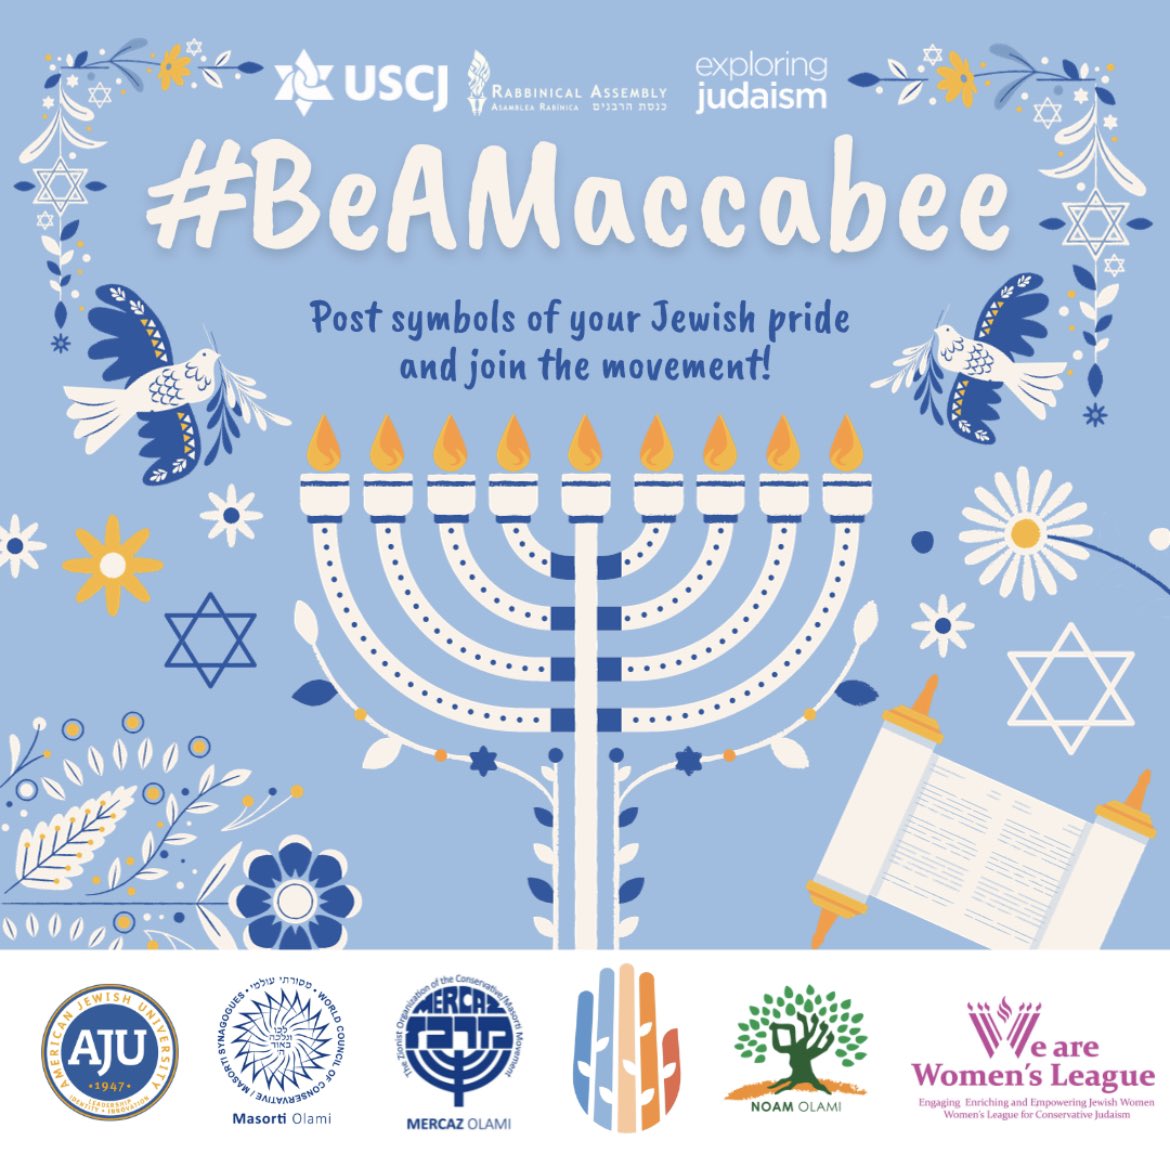 The original story of Hanukkah contains a kaleidoscope of themes & messages. This year, we are focusing on the story of the Maccabees’ resistance to assimilation as a parallel to our modern-day need for Jewish pride.#BeAMaccabee